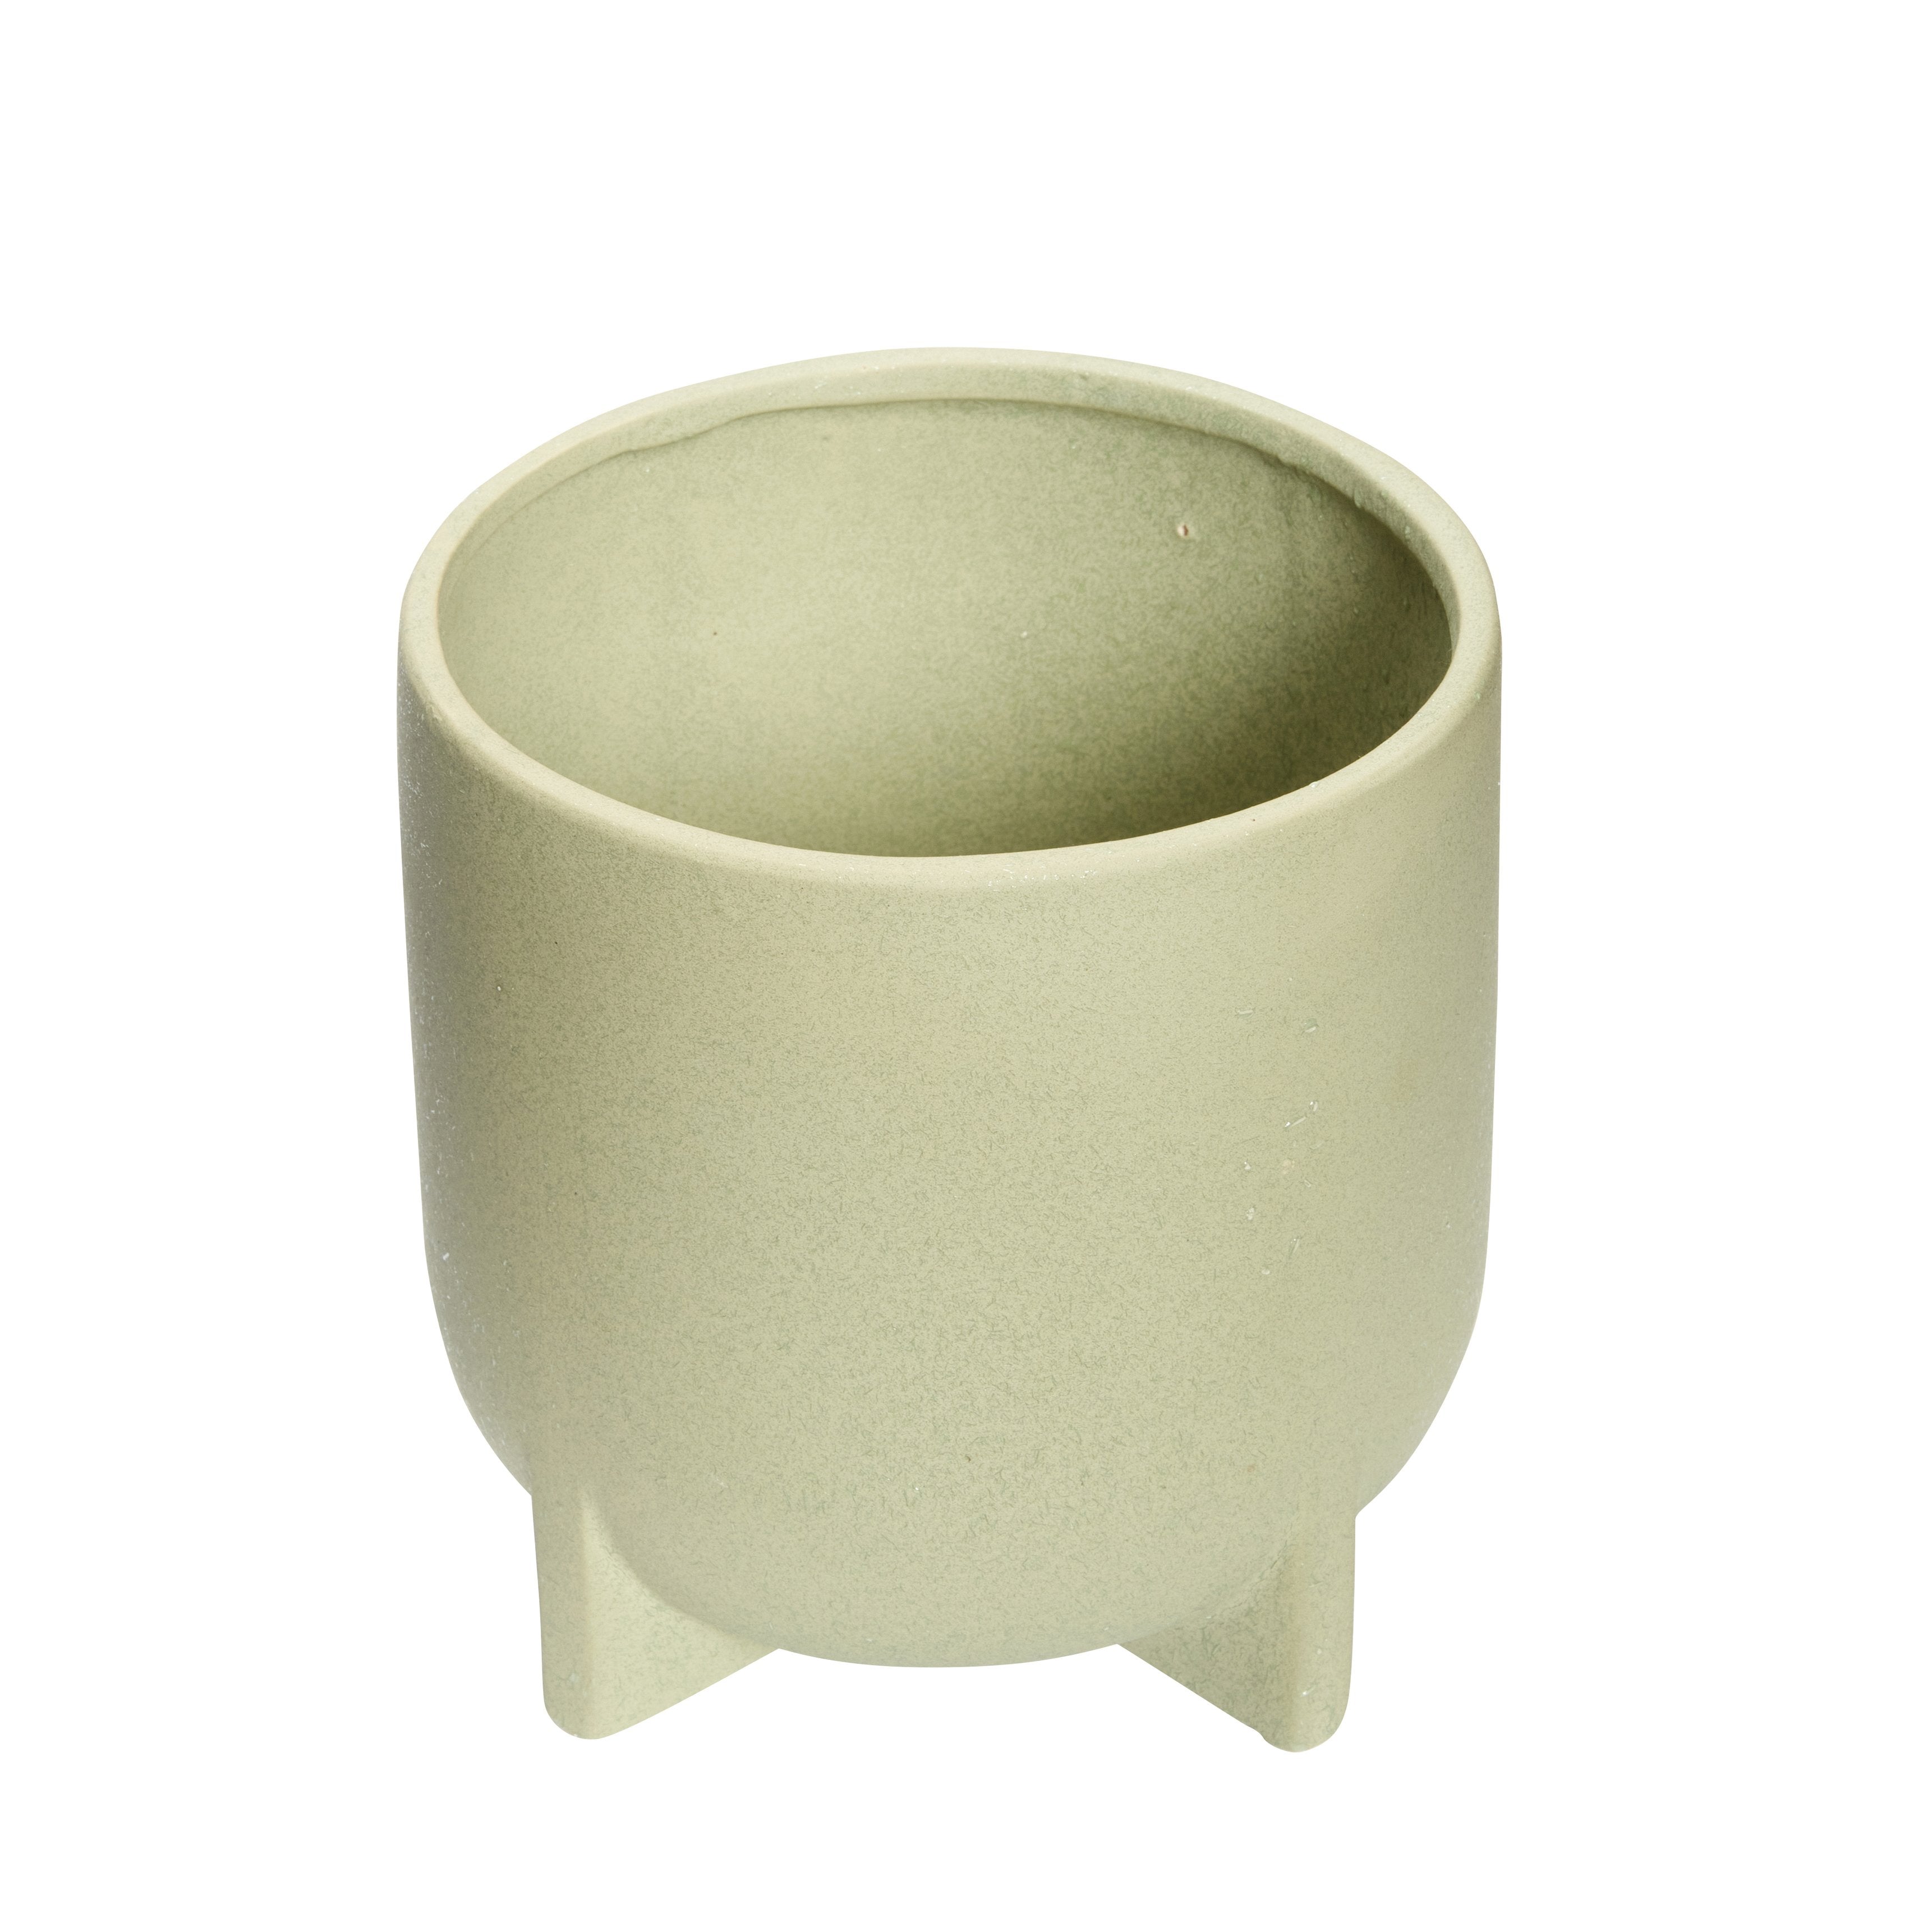 Mint Ceramic Pot with Legs in Small